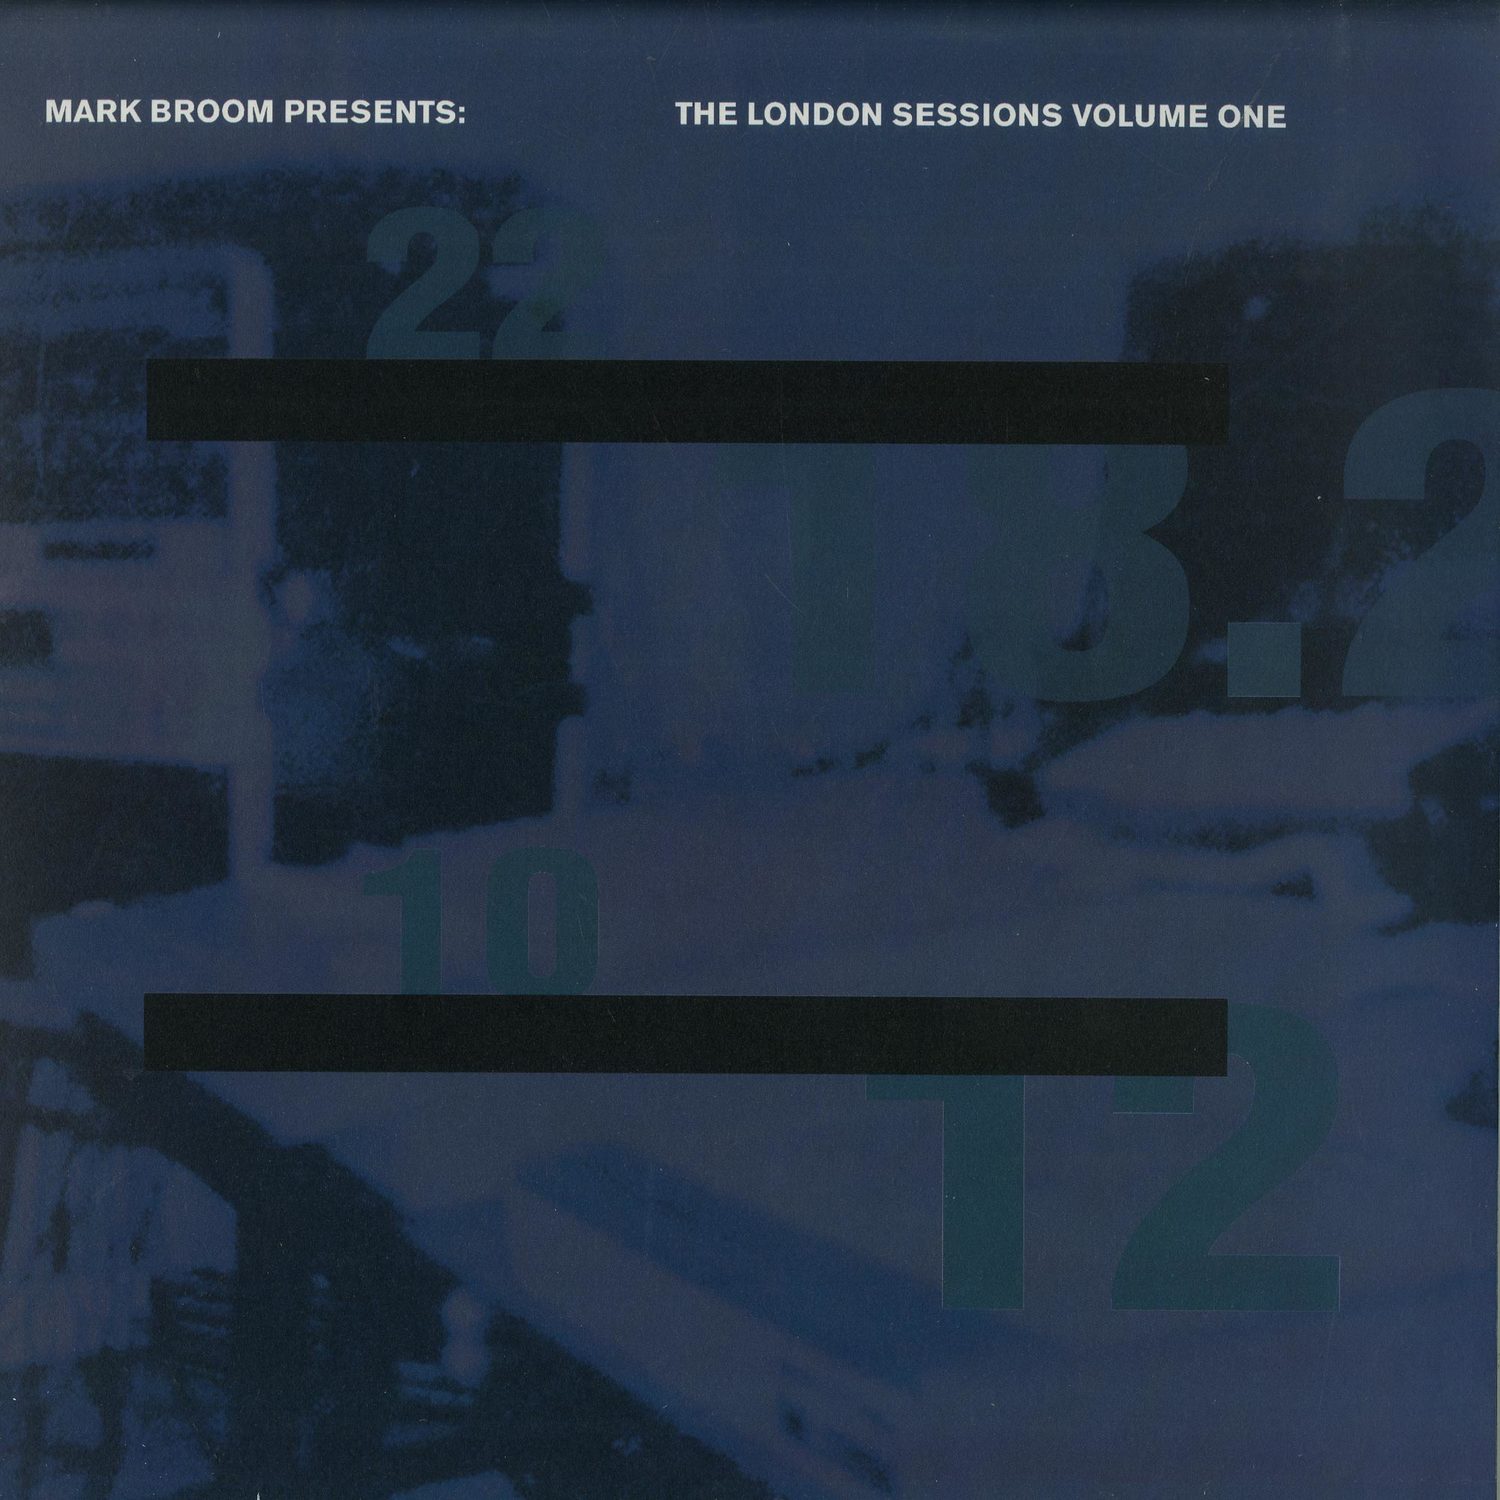 Mark Broom - THE LONDON SESSIONS VOL ONE